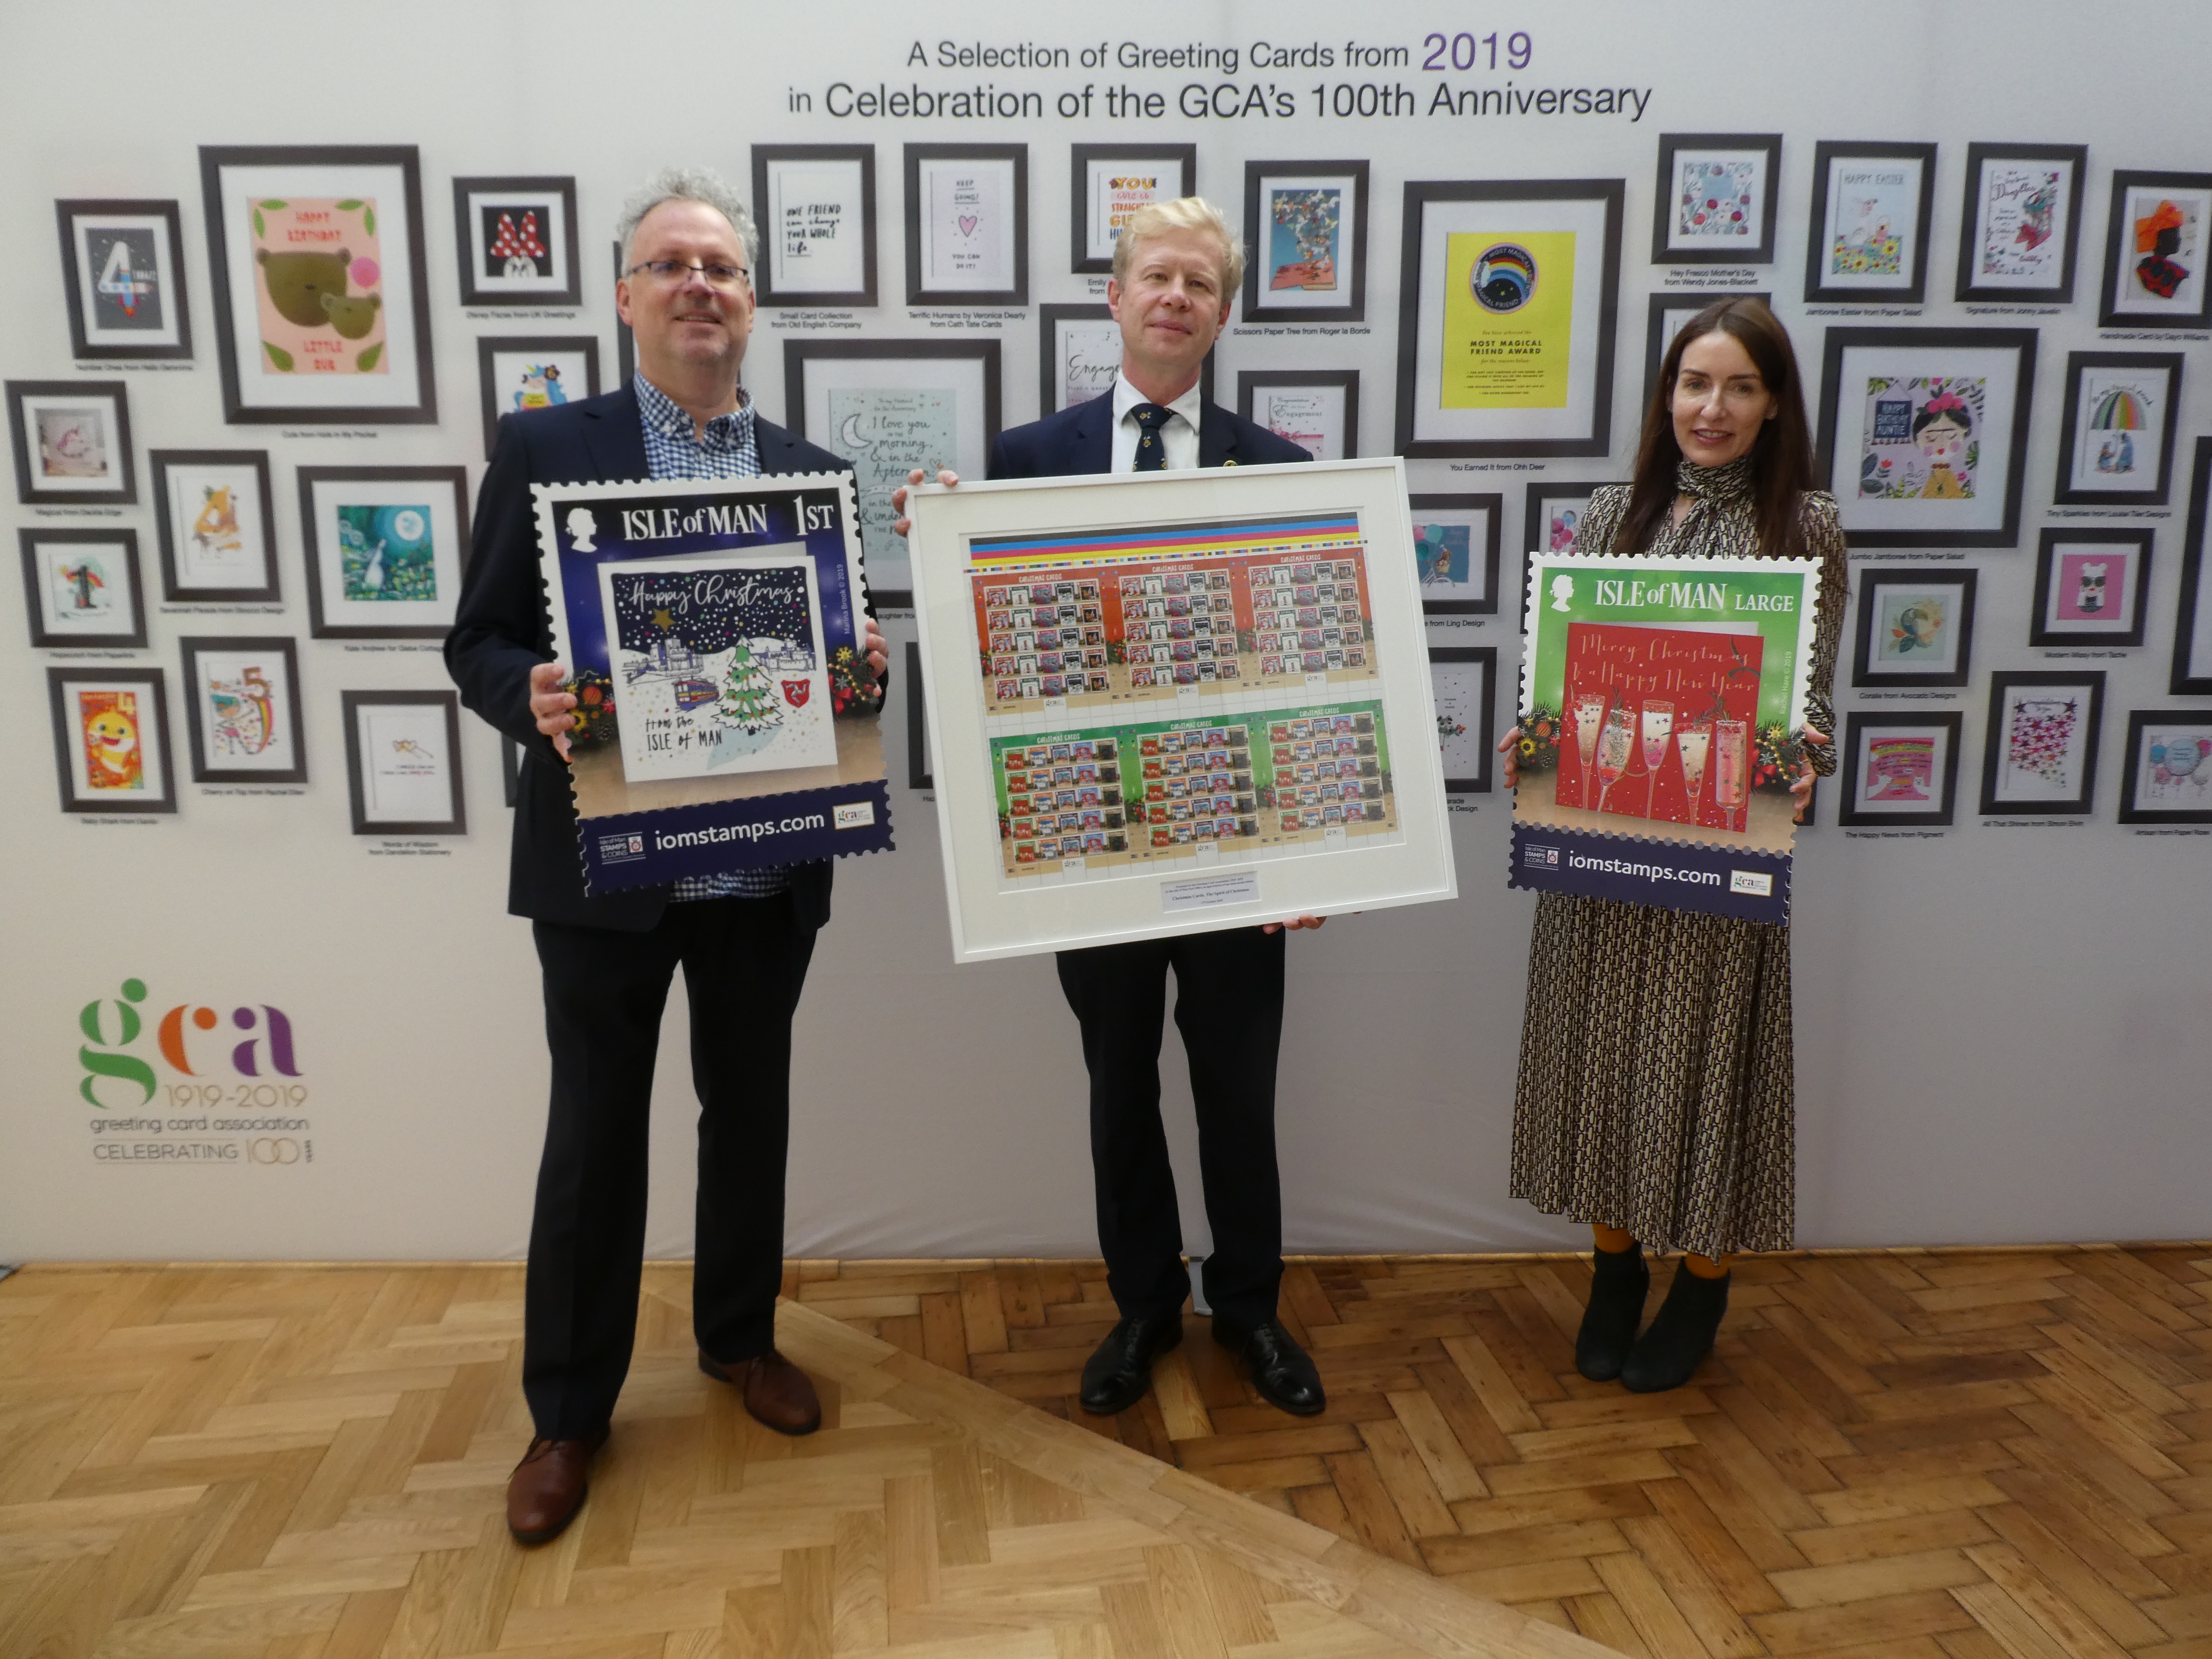 Above: In support of the GCA’s centenary, the Isle of Man Post Office is dedicating this year’s Christmas stamp collection to greeting card art, submitted by GCA publisher members. On behalf of the isle’s Post Office, Ben Glazier, md of Glazier Design presented the GCA with a valuable commemorative set of the stamps, accepted by Rachel Hare, GCA president (and donator of one of the designs) and Geoff Sanderson (of Celebration Nation who co-ordinated the stamp project on behalf of the GCA and Isle of Man Post Office).   